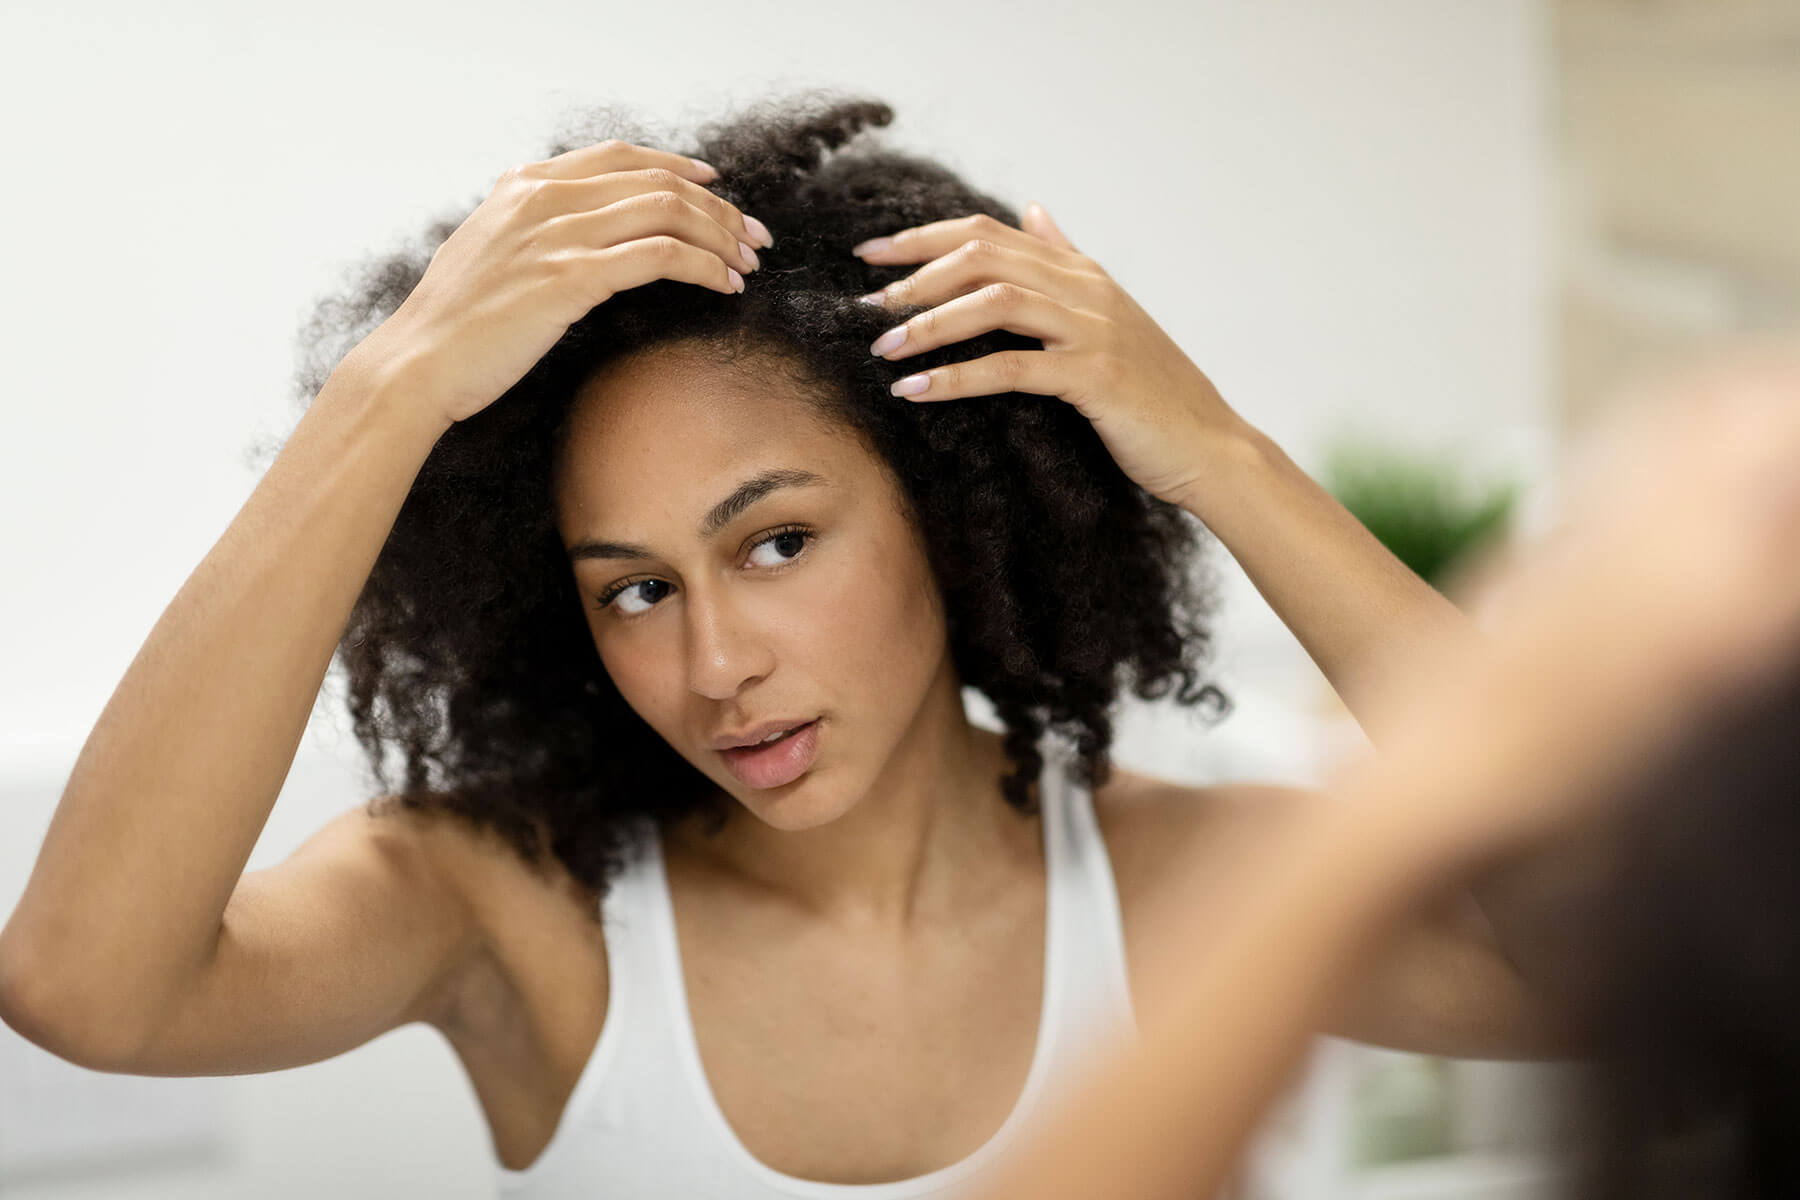 How to Get Rid of Dry Scalp. Portrait of a beautiful young woman examining her scalp and hair in front of the mirror, hair roots, color, grey hair, hair loss or dry scalp problem